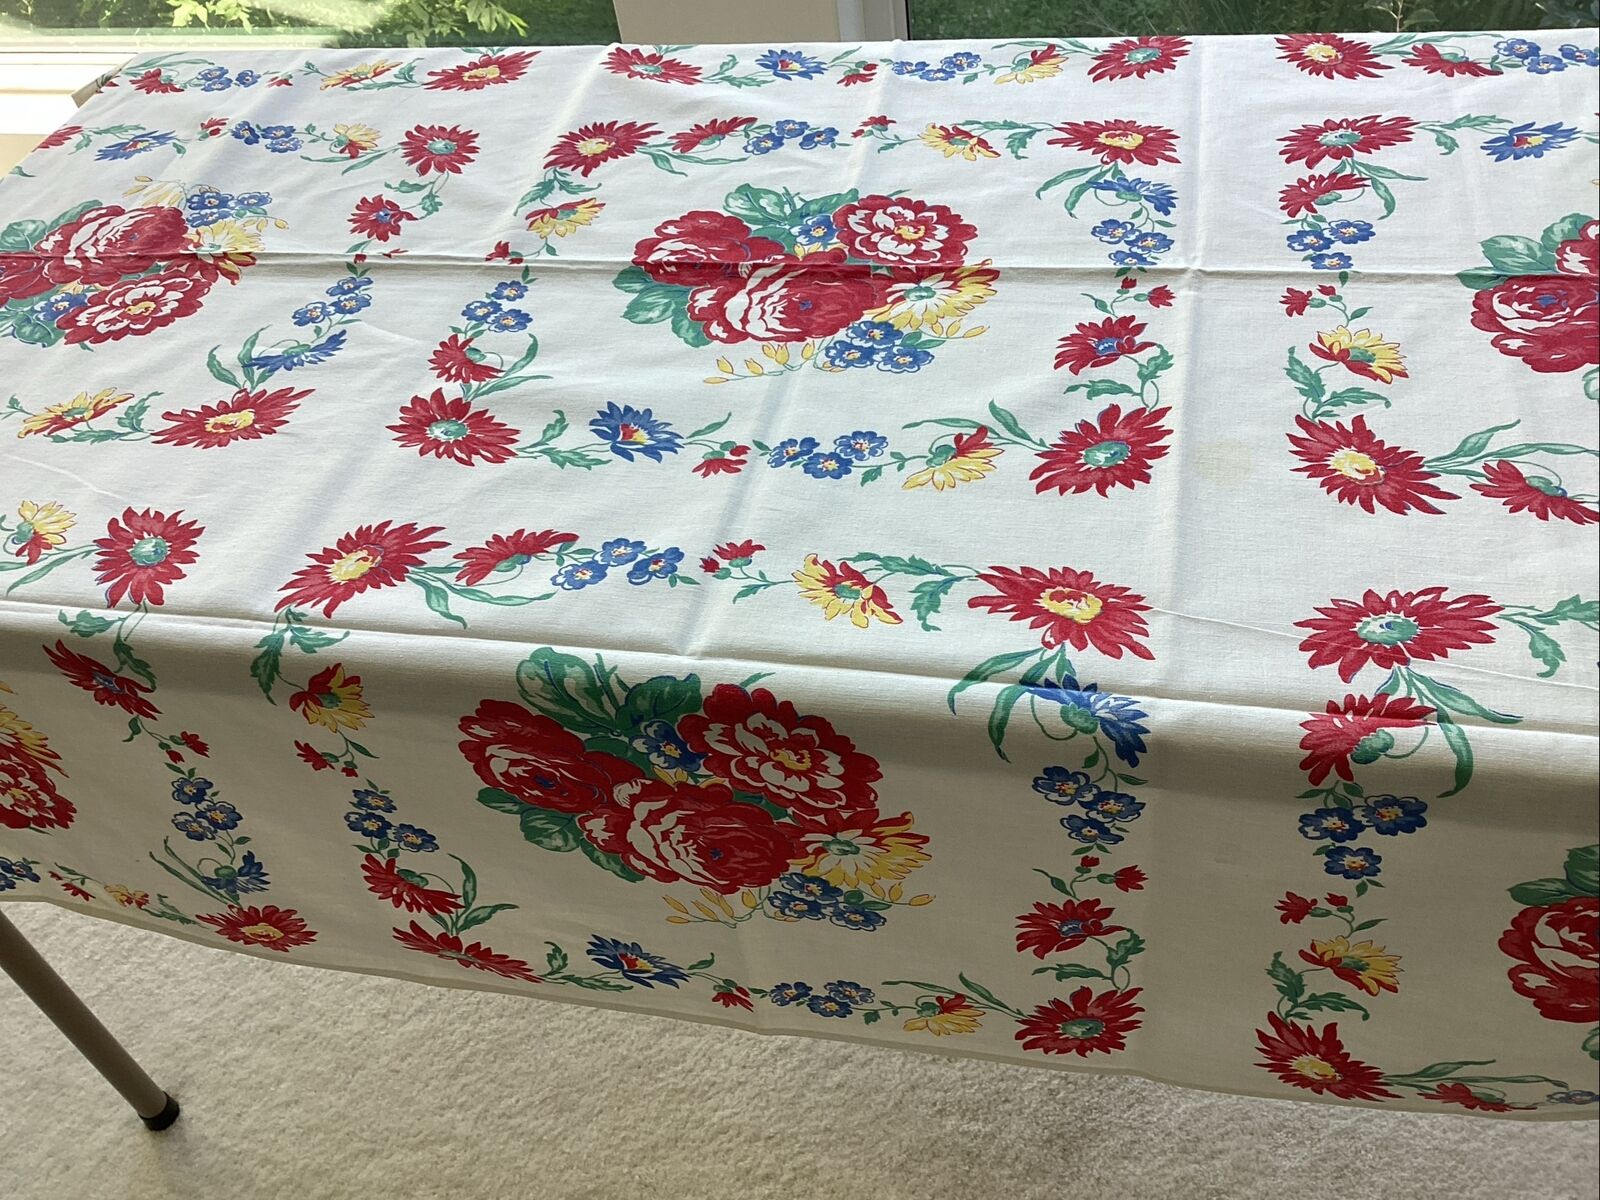 VTG 50’s FLOWER COVERED TABLECLOTH PRIMARY COLORS RED BLUE YELLOW GREEN 54” X48”